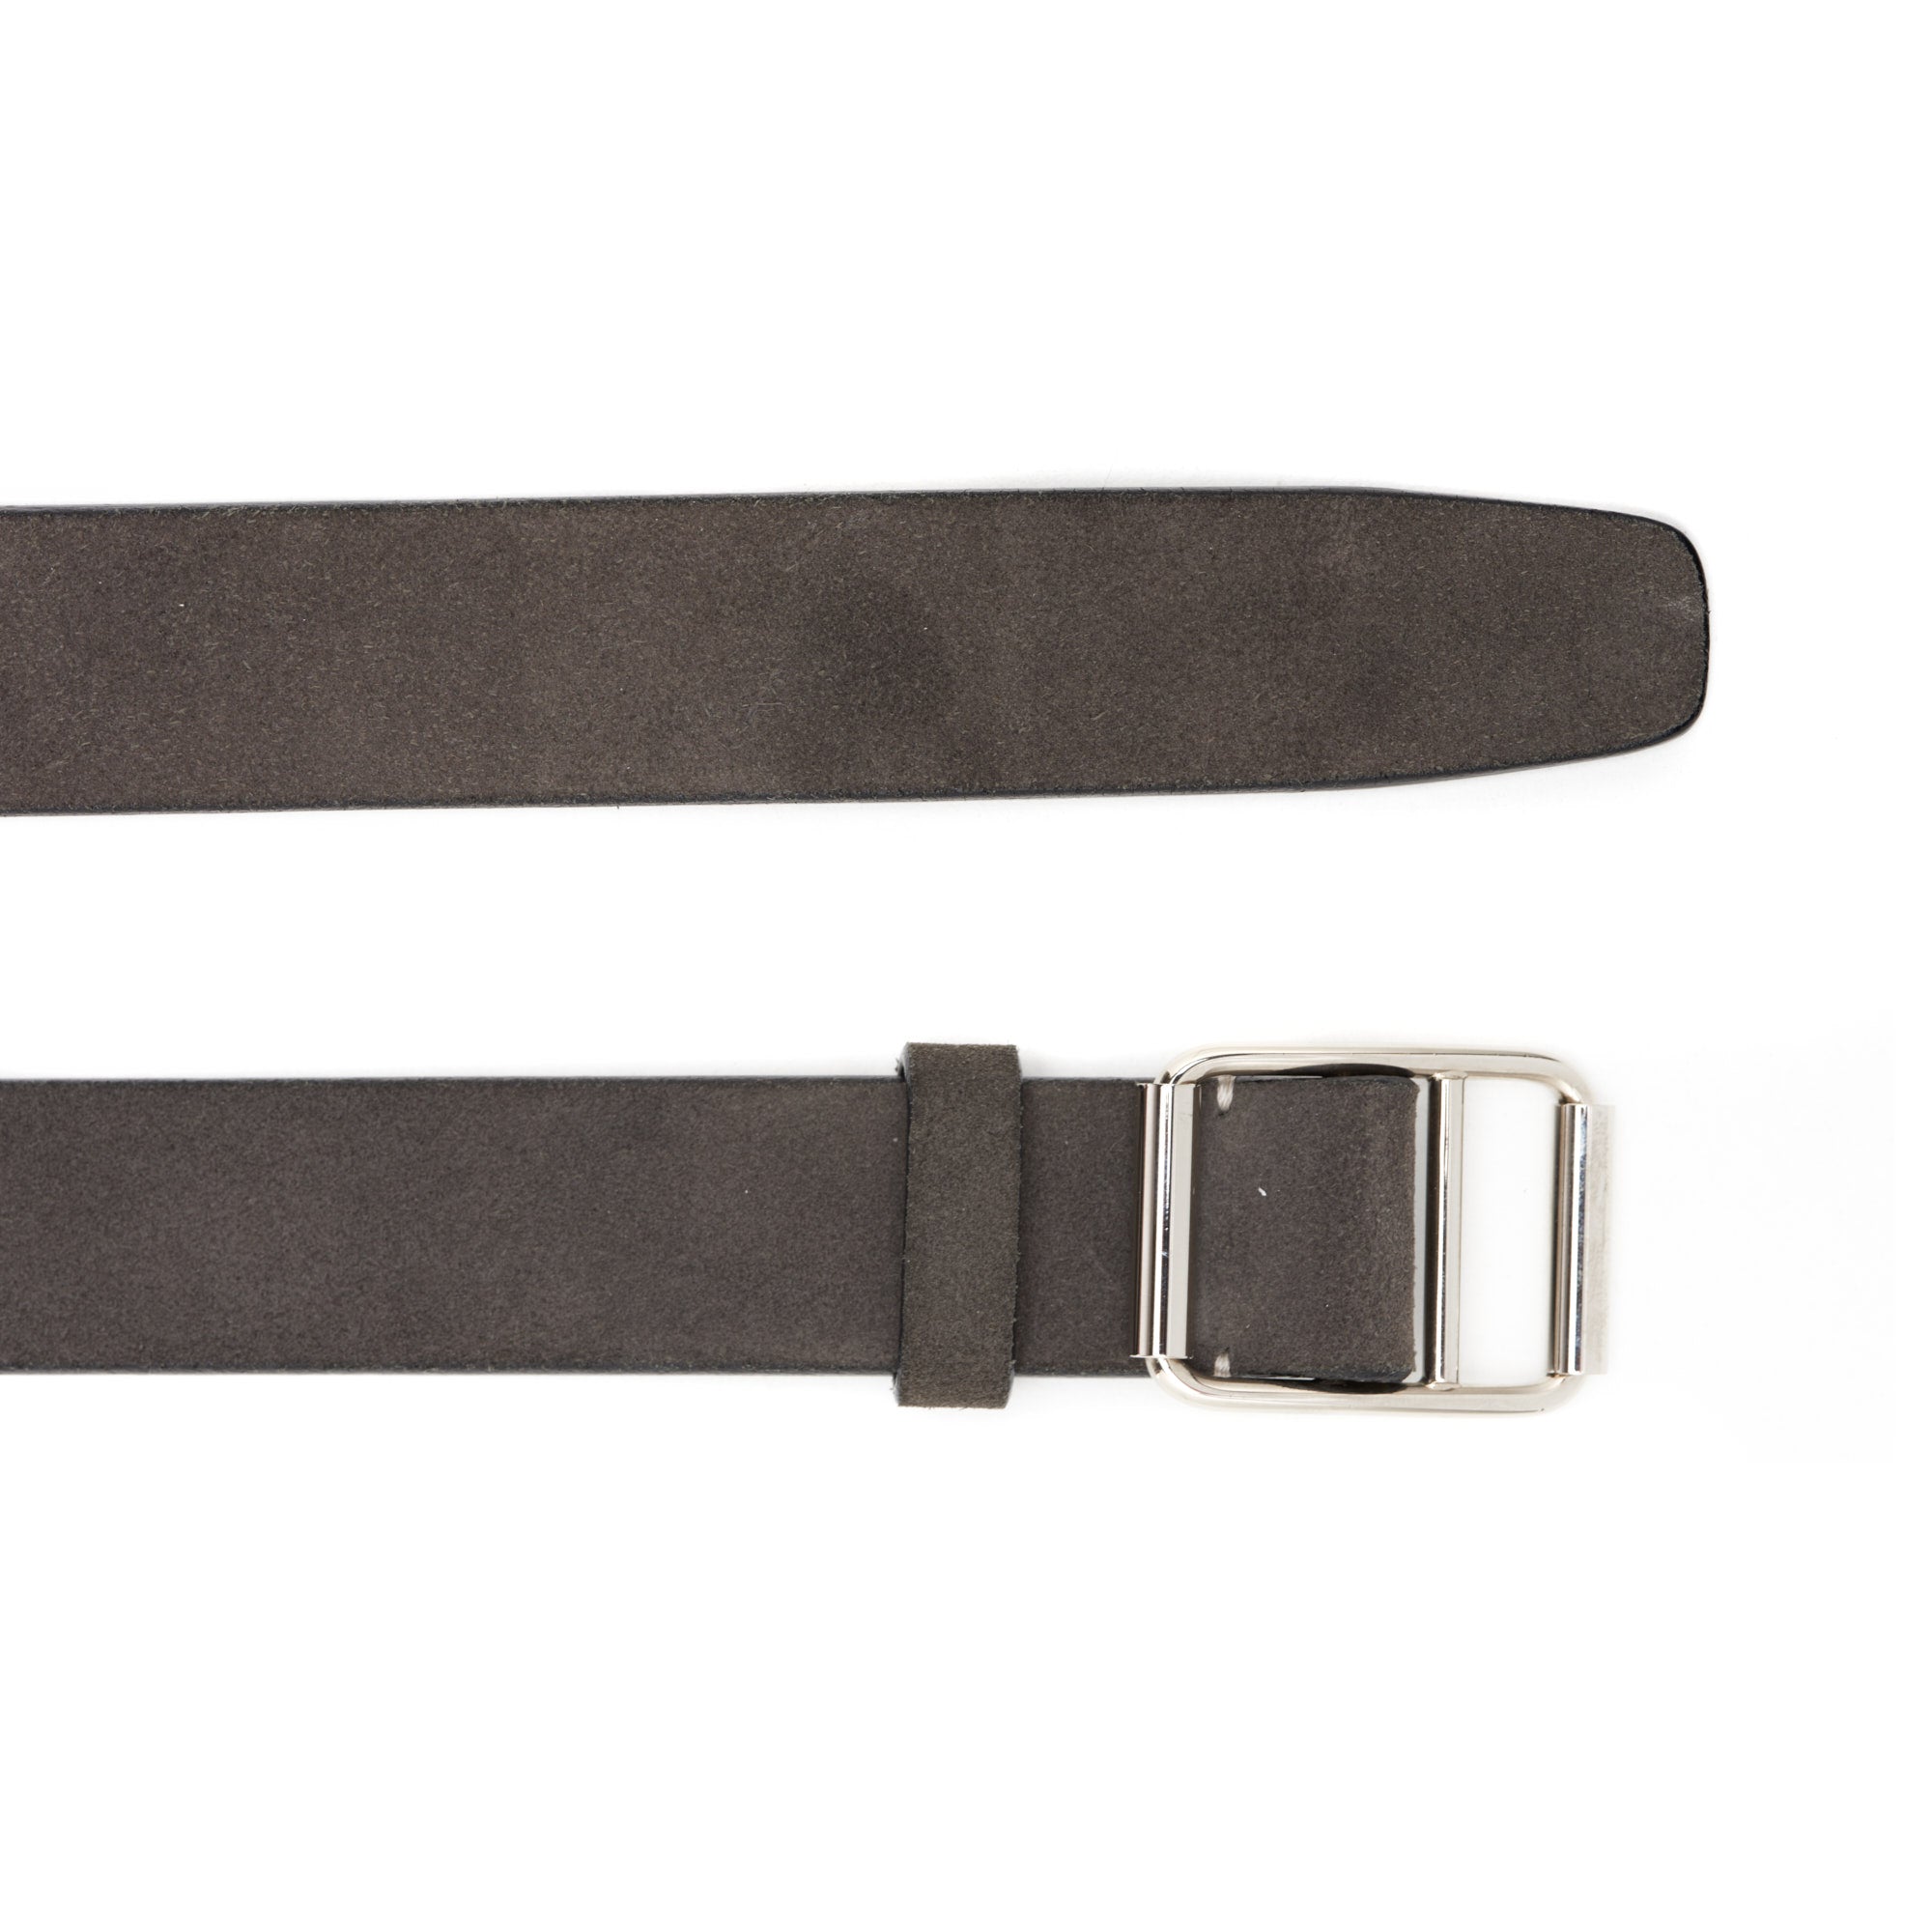 VALEXTRA Gray Suede Leather Belt with Rectangular Buckle 85/100cm/ 33" NEW